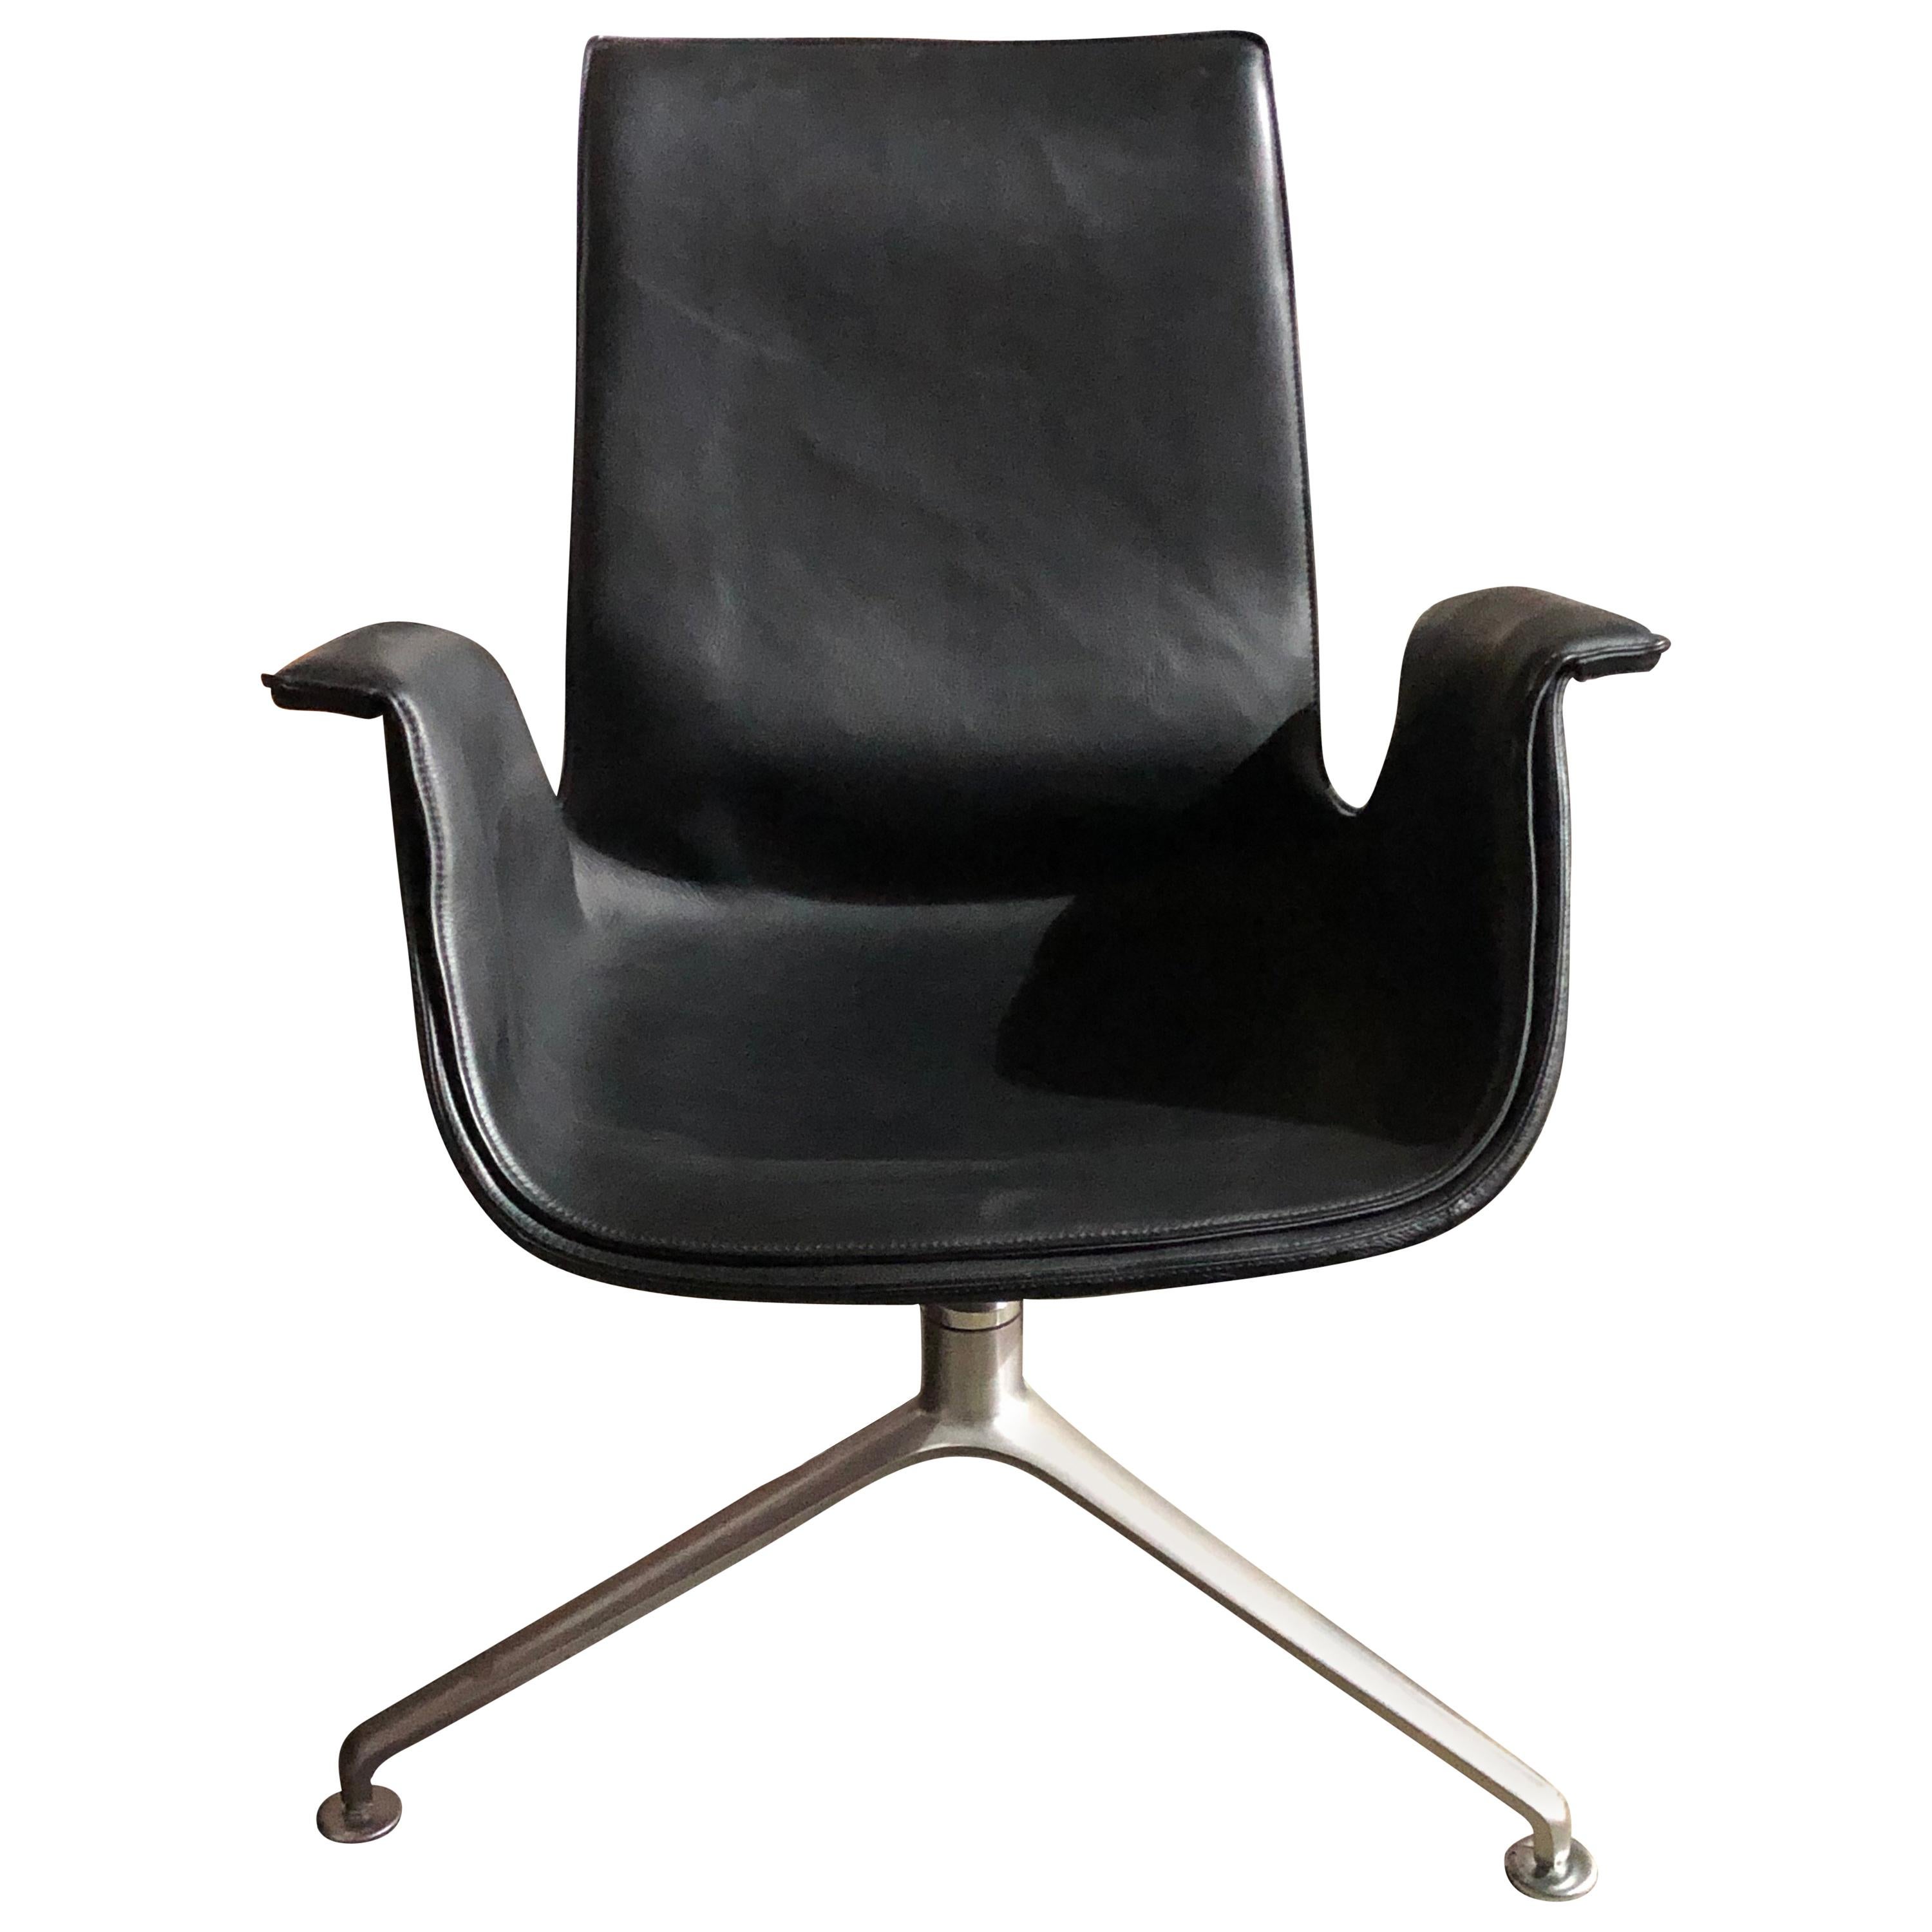 Walter Knoll Black Leather FK Lowback Bucket Chair with 3-Star Base